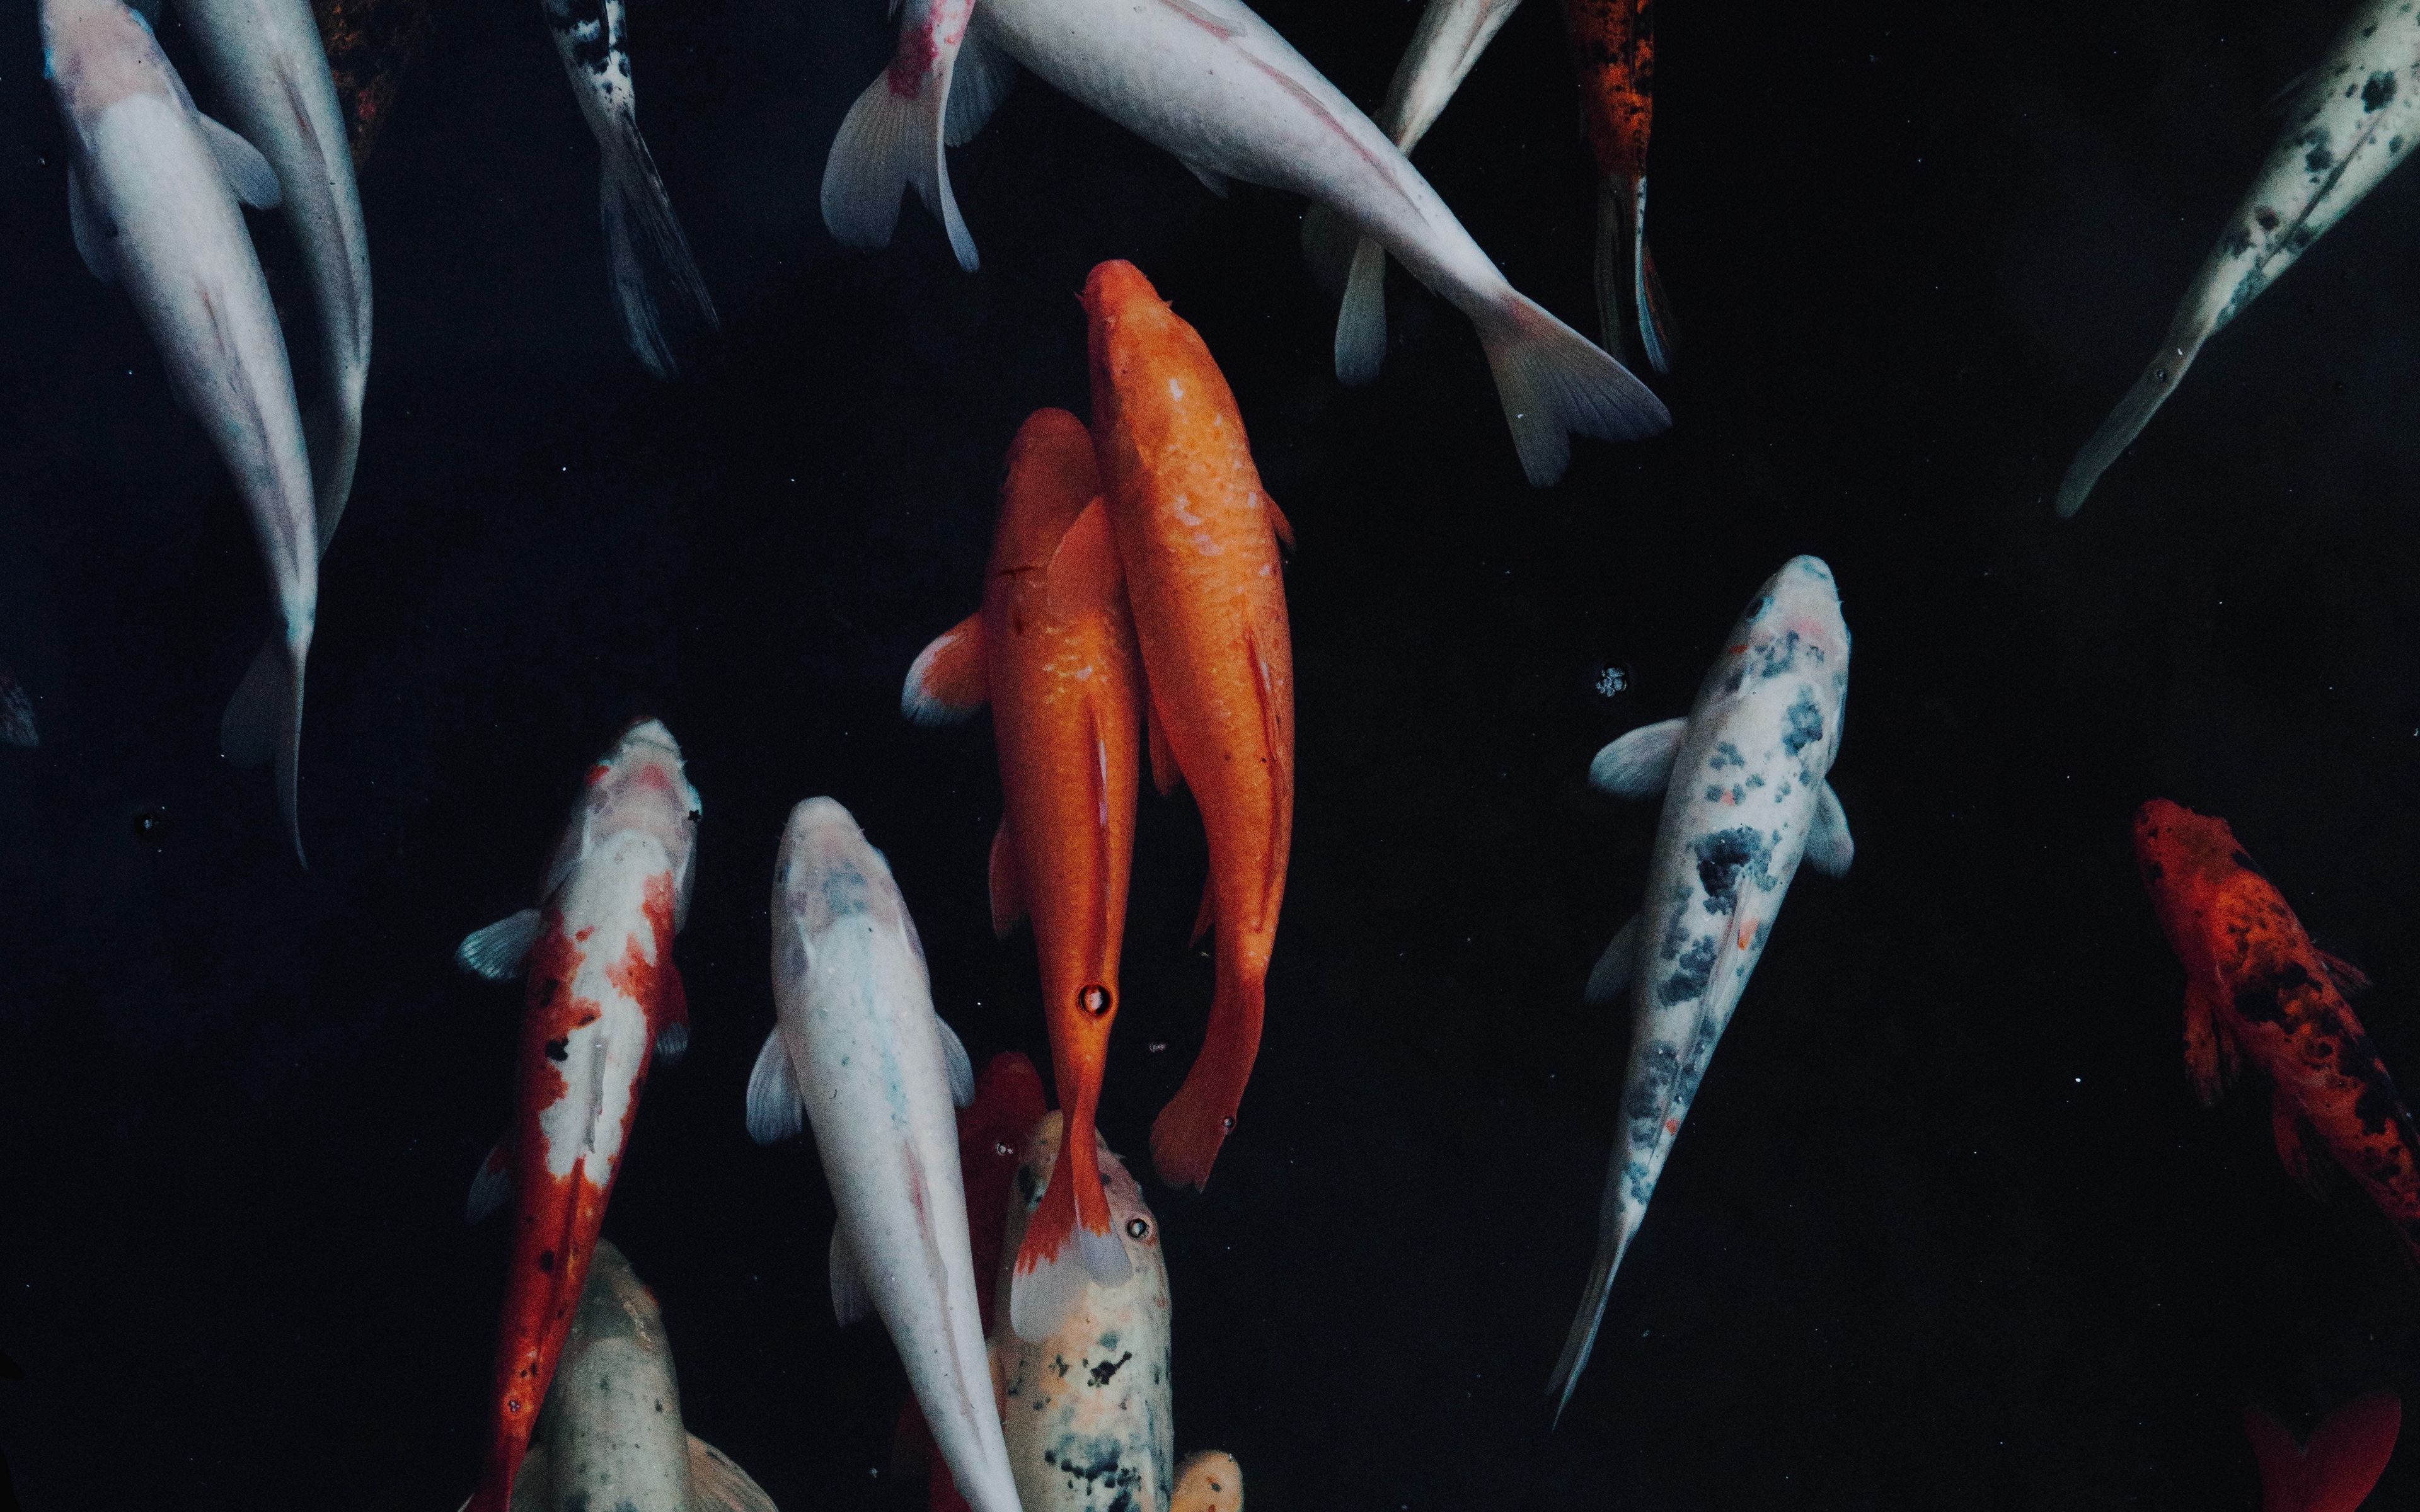 A group of fish swimming in the water - Koi fish